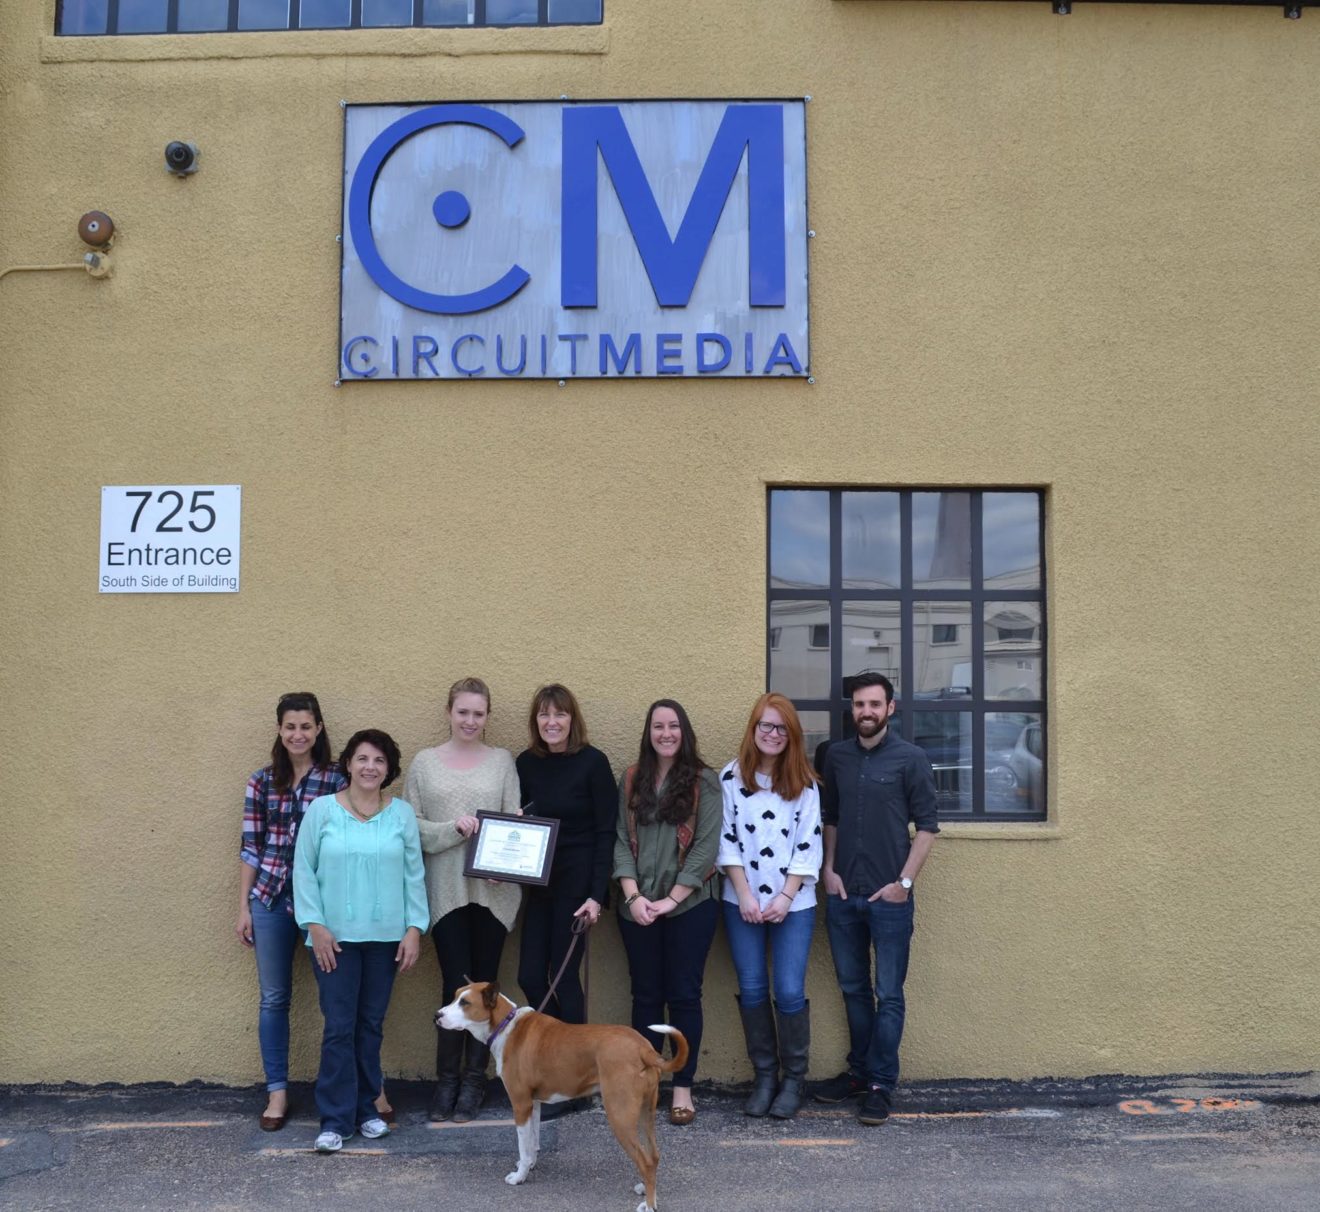 The Circuit Media staff and Paisley pose in front of the Circuit Media sign, holding up their newly earned Green Business Certificate.